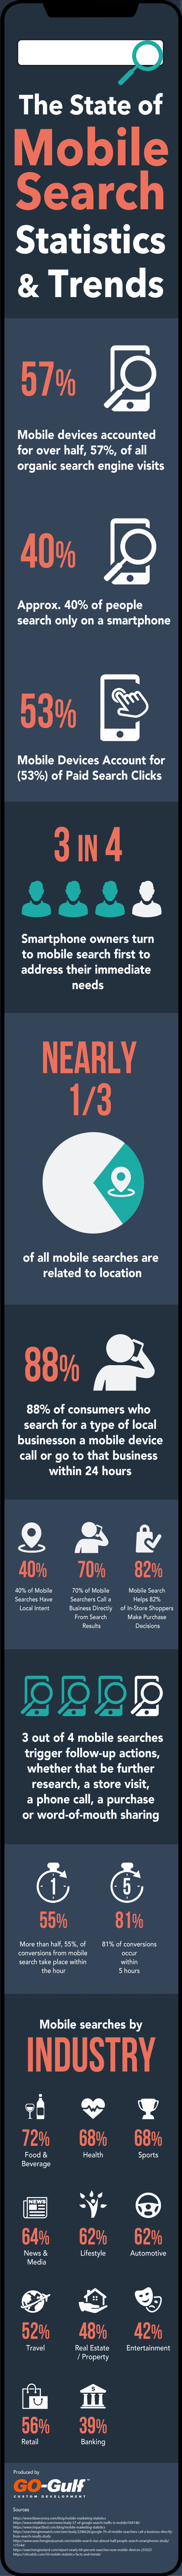 Statistics of the mobile search state